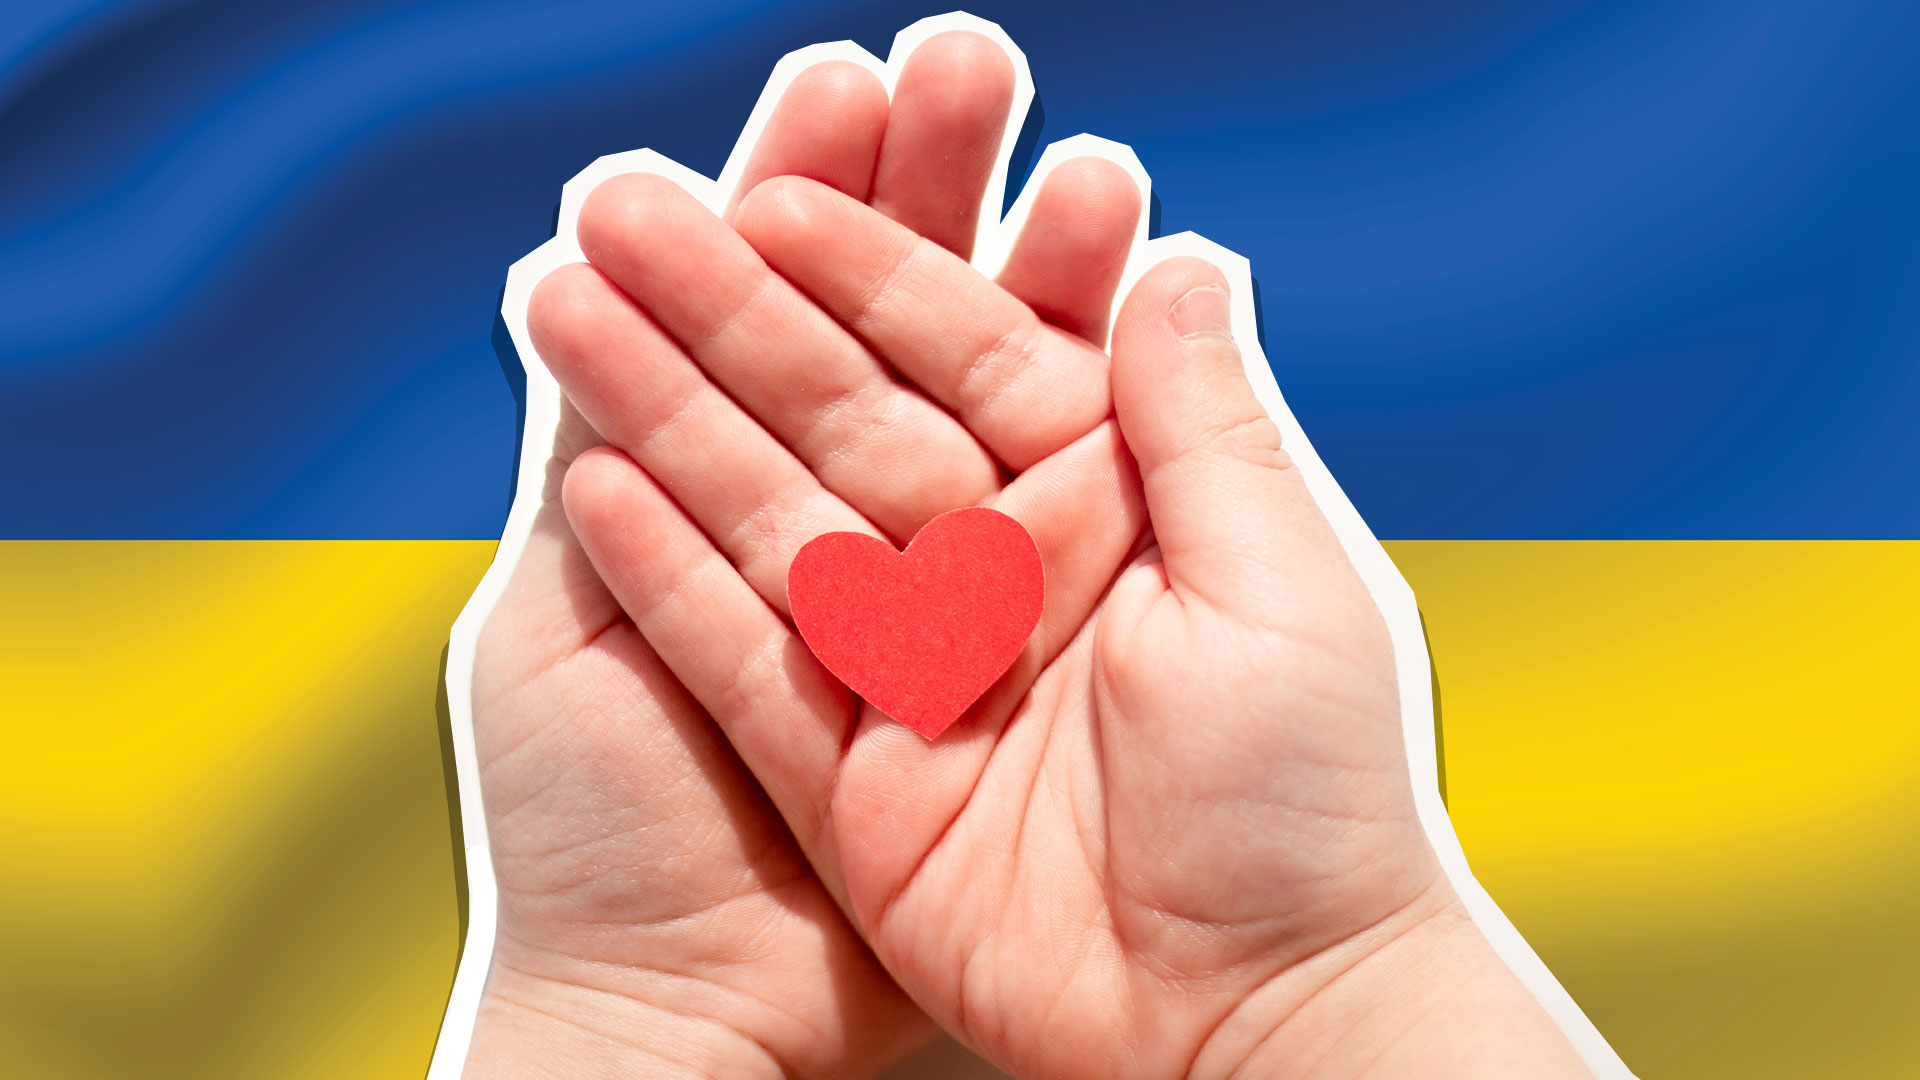 Hands holding a paper heart, with the Ukraine flag in the background